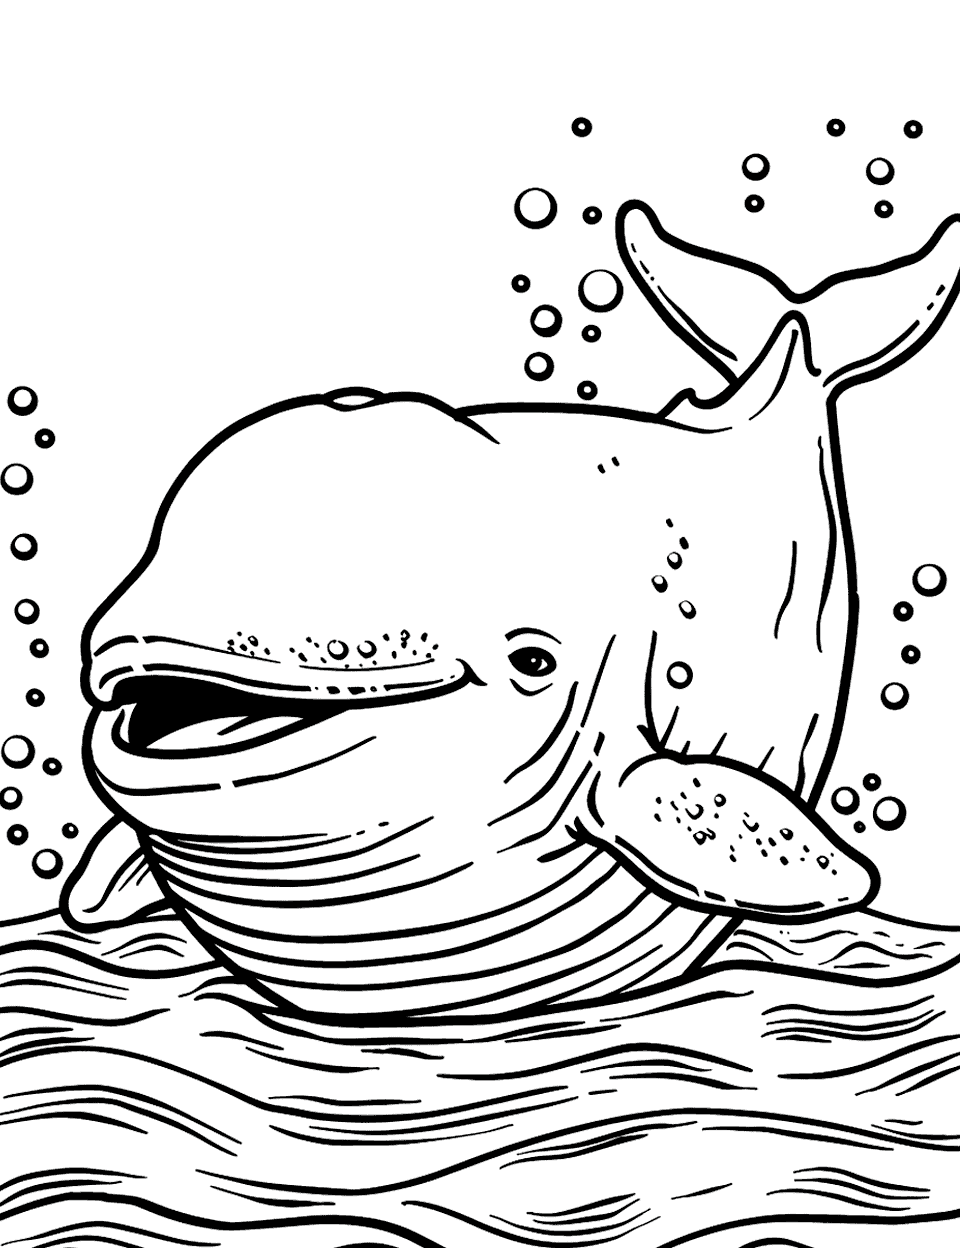 Beluga Whale Smiling in the Arctic Sea Creature Coloring Page - A beluga whale surfaces from the Arctic waters with a characteristic smile.